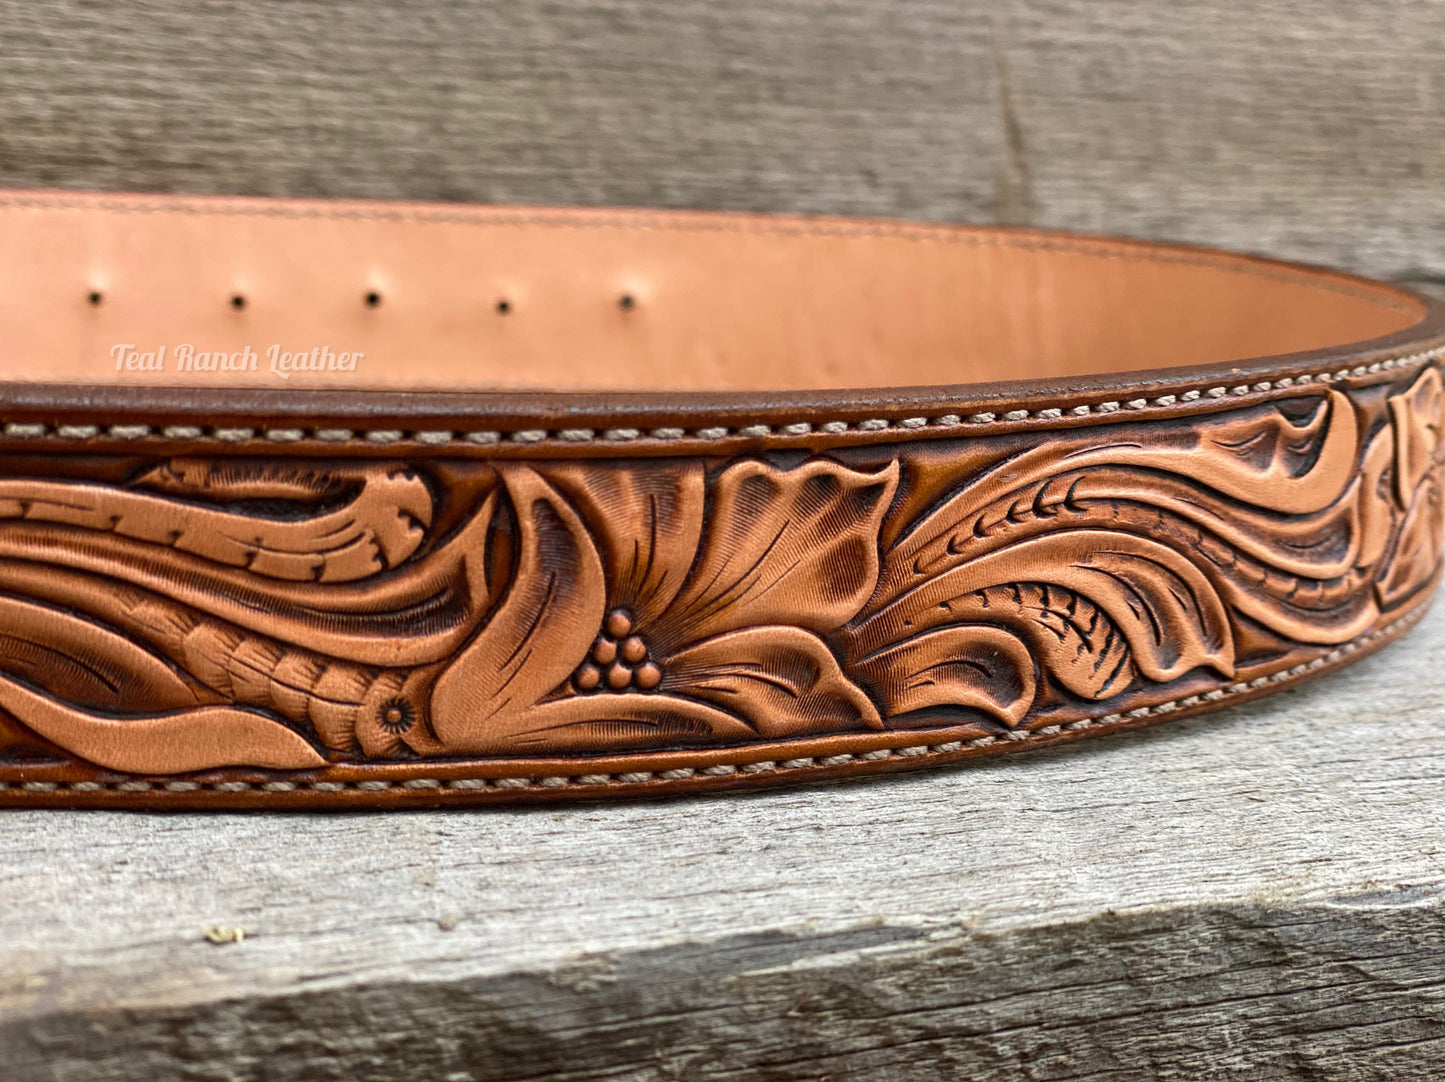 Tooled leather belt in walnut- size 29